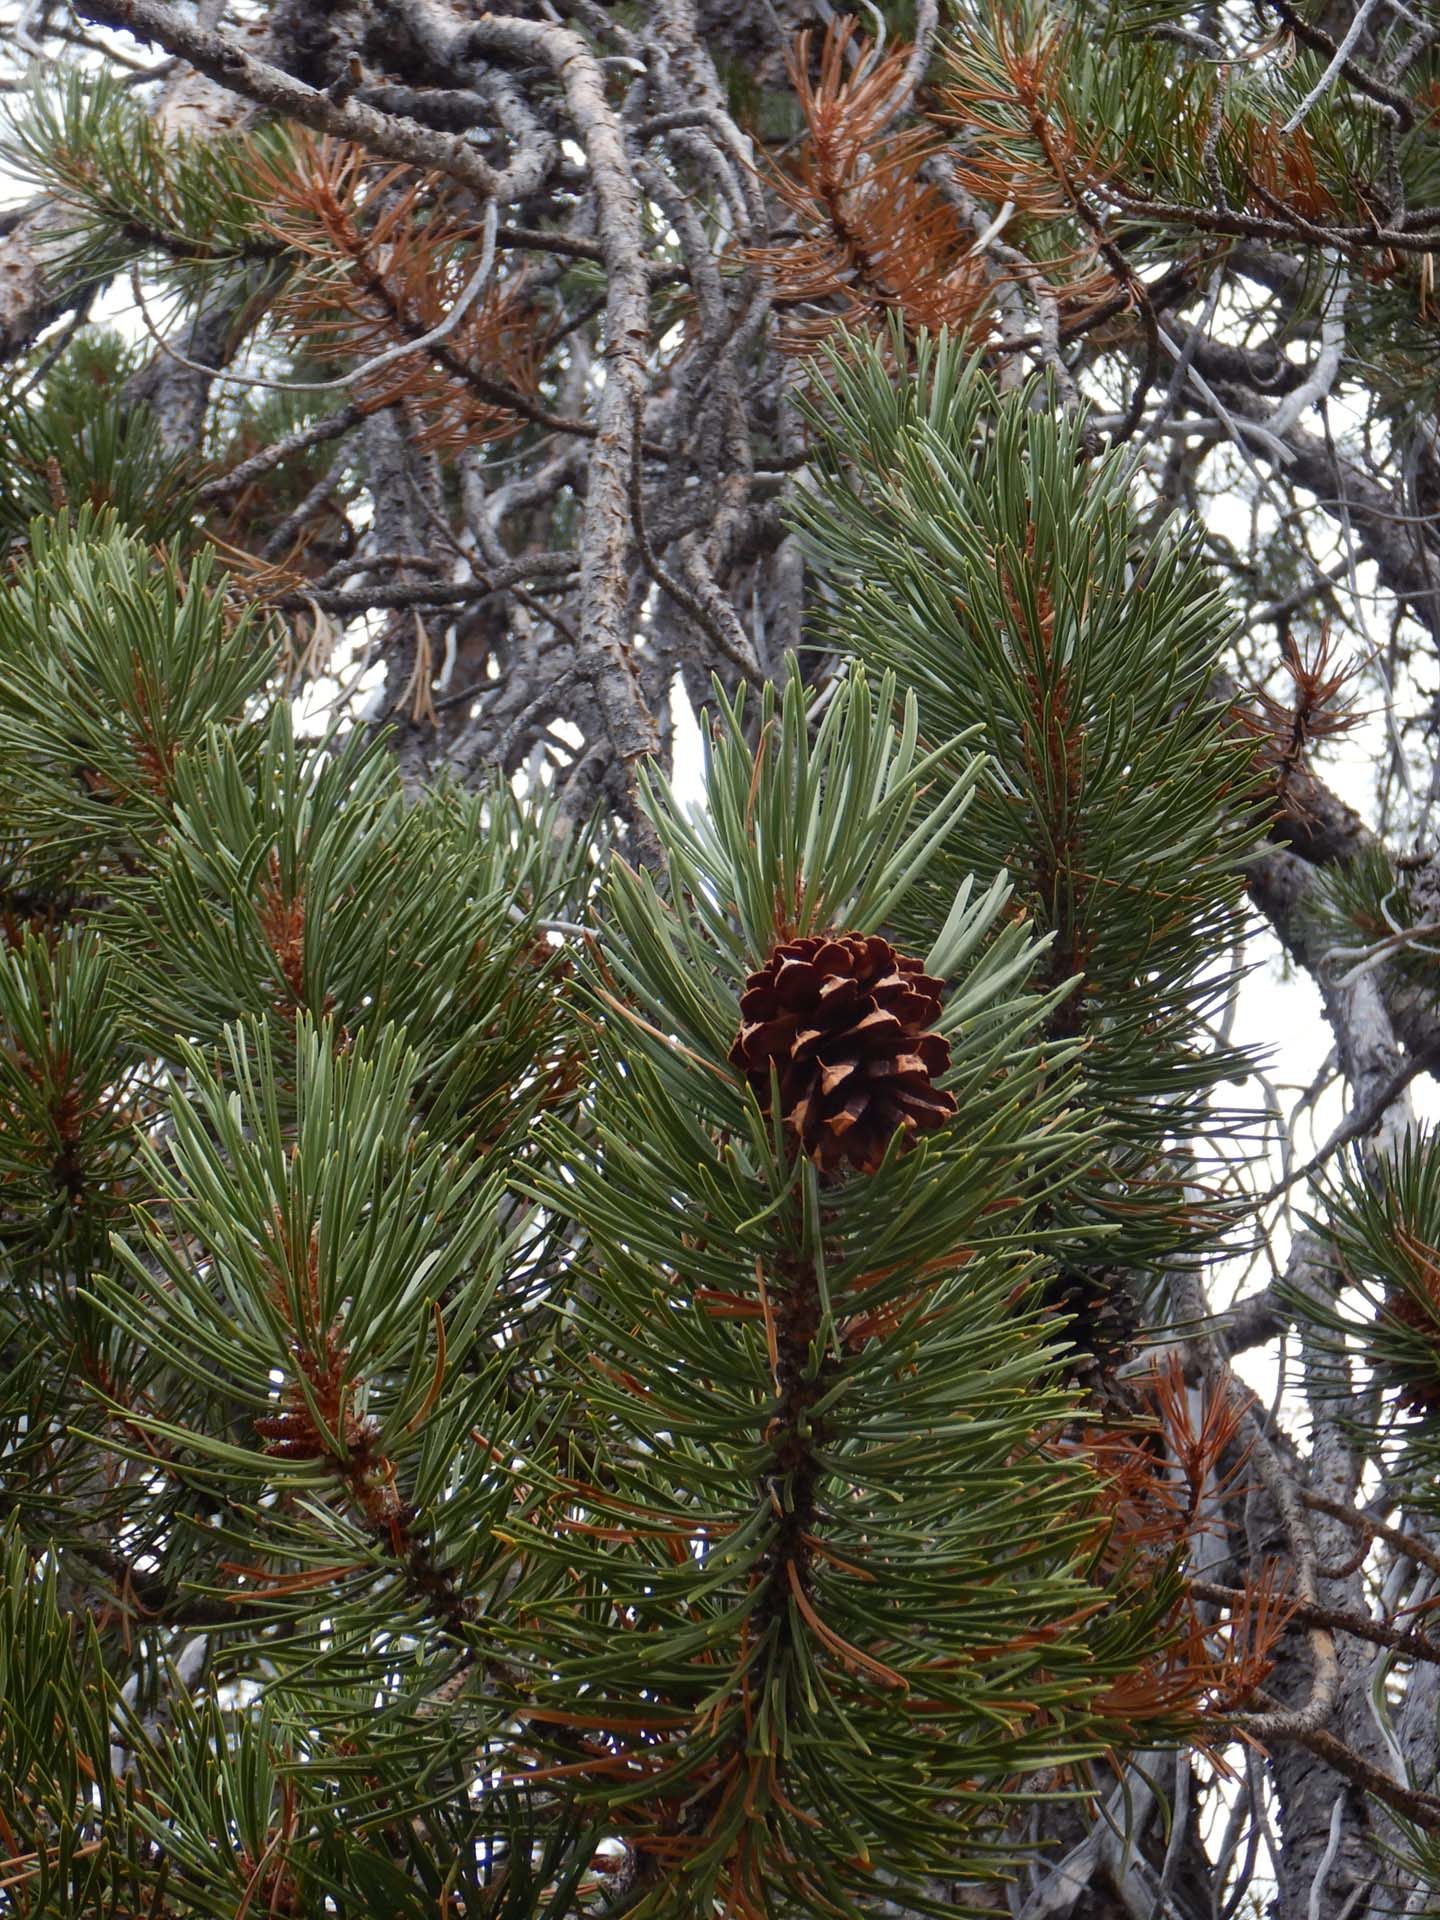 Lodgepole pine with cone. D. Burk.